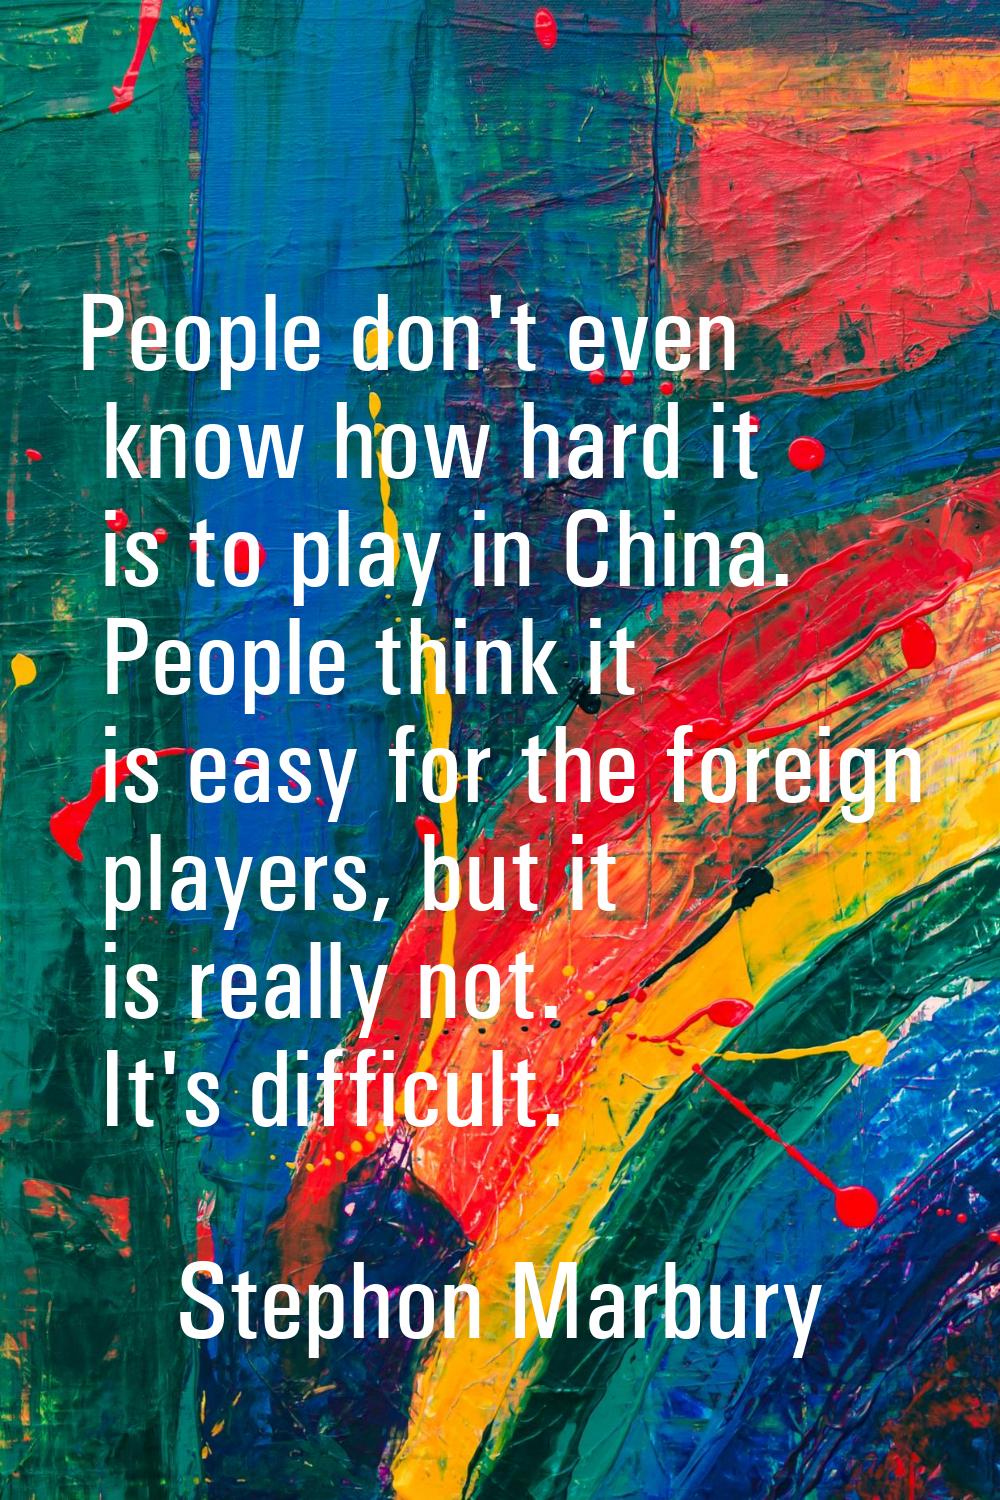 People don't even know how hard it is to play in China. People think it is easy for the foreign pla